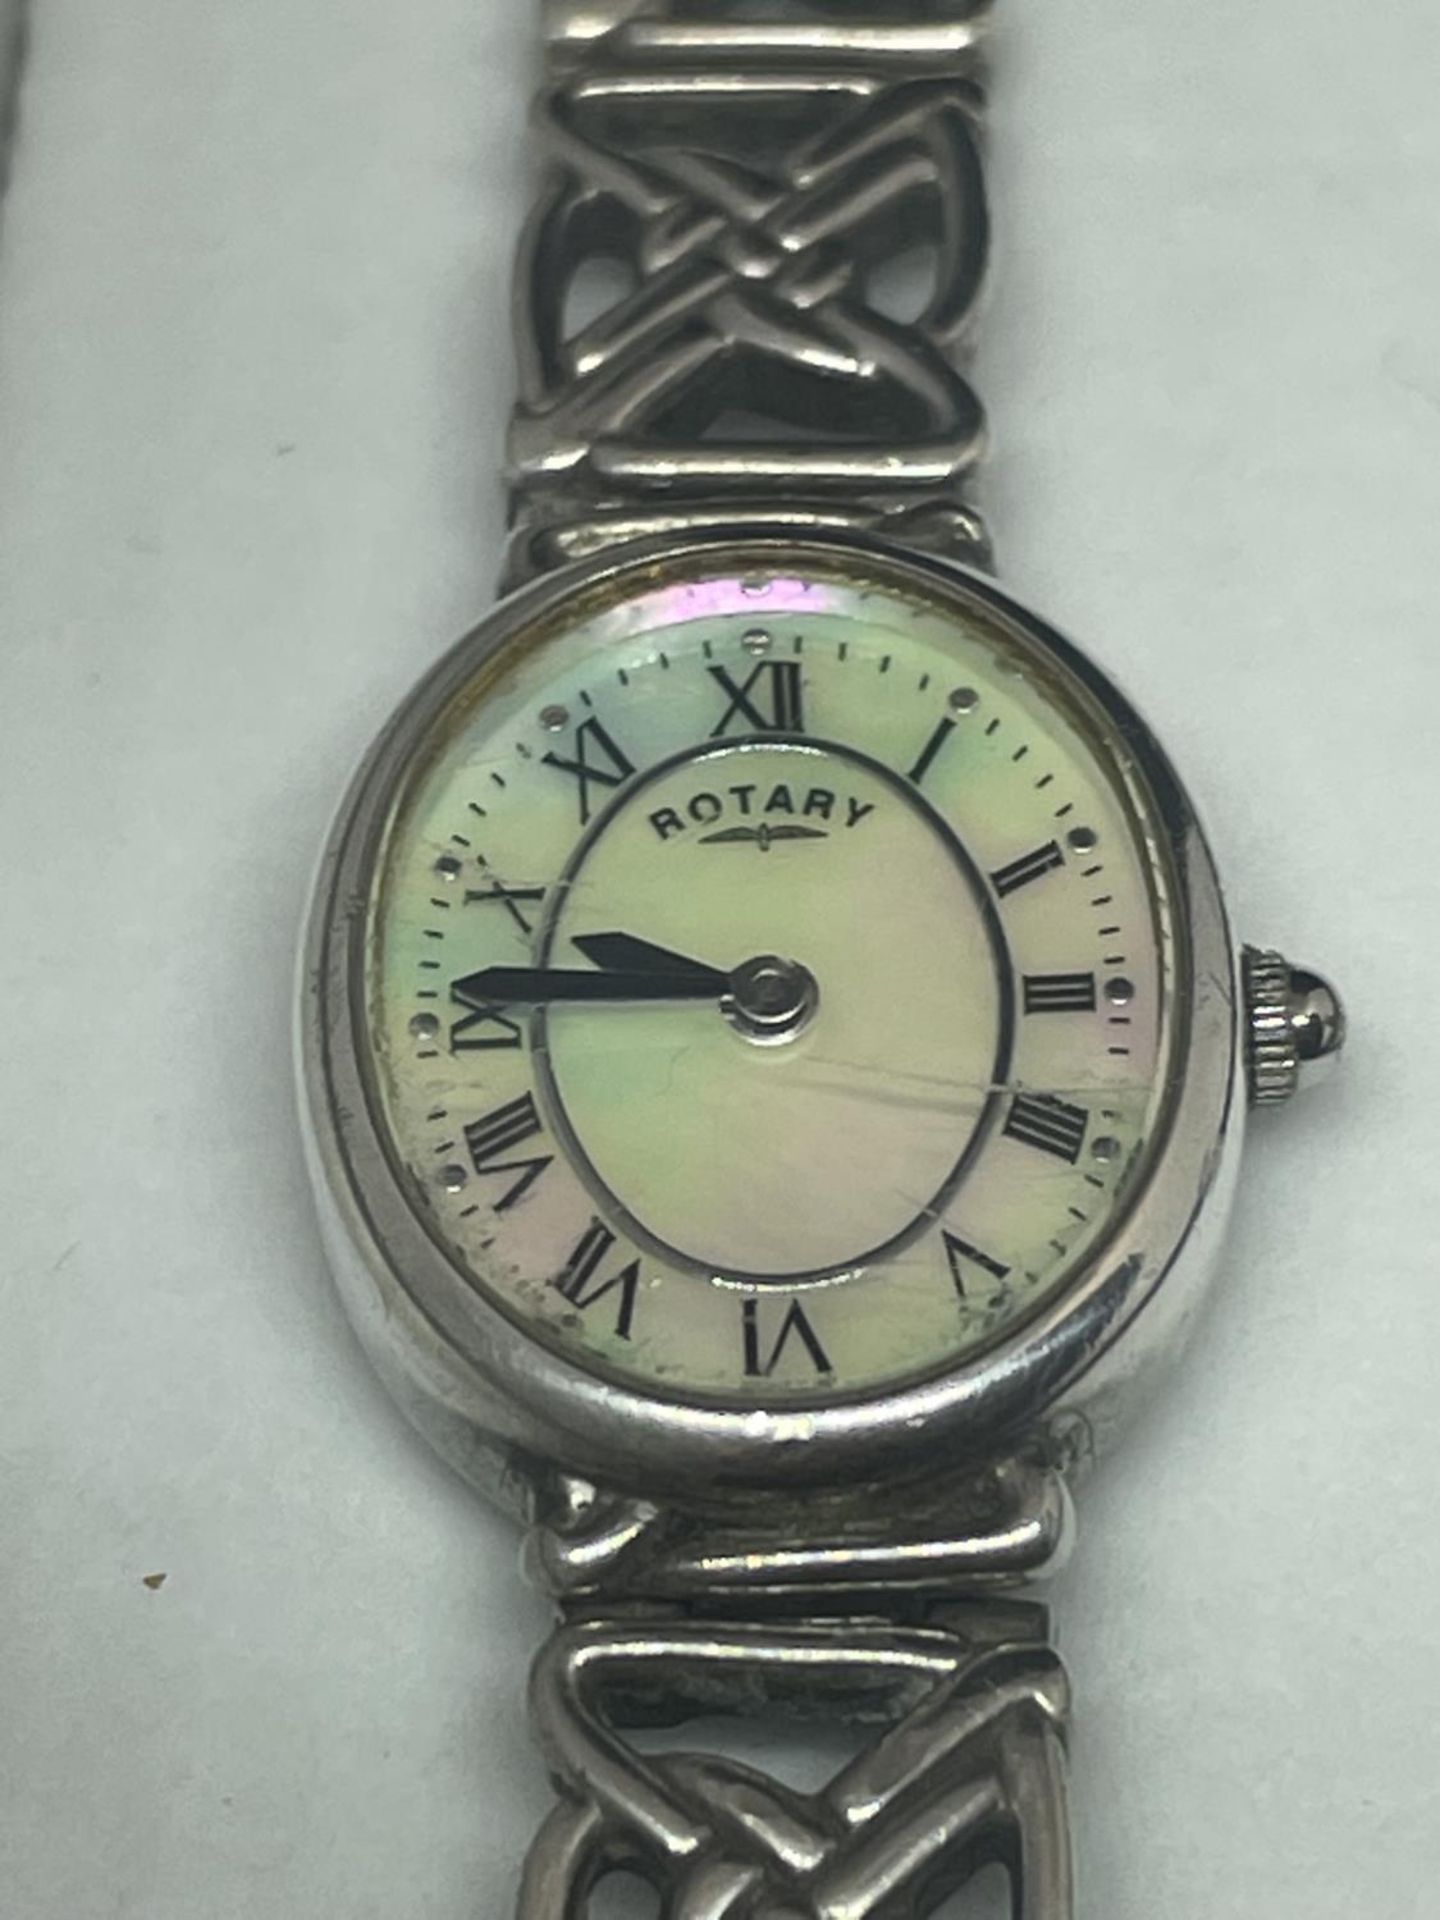 A SILVER ROTARY WRIST WATCH WITH A PEARLISED FACE IN A PRESENTATION BOX - Image 2 of 3